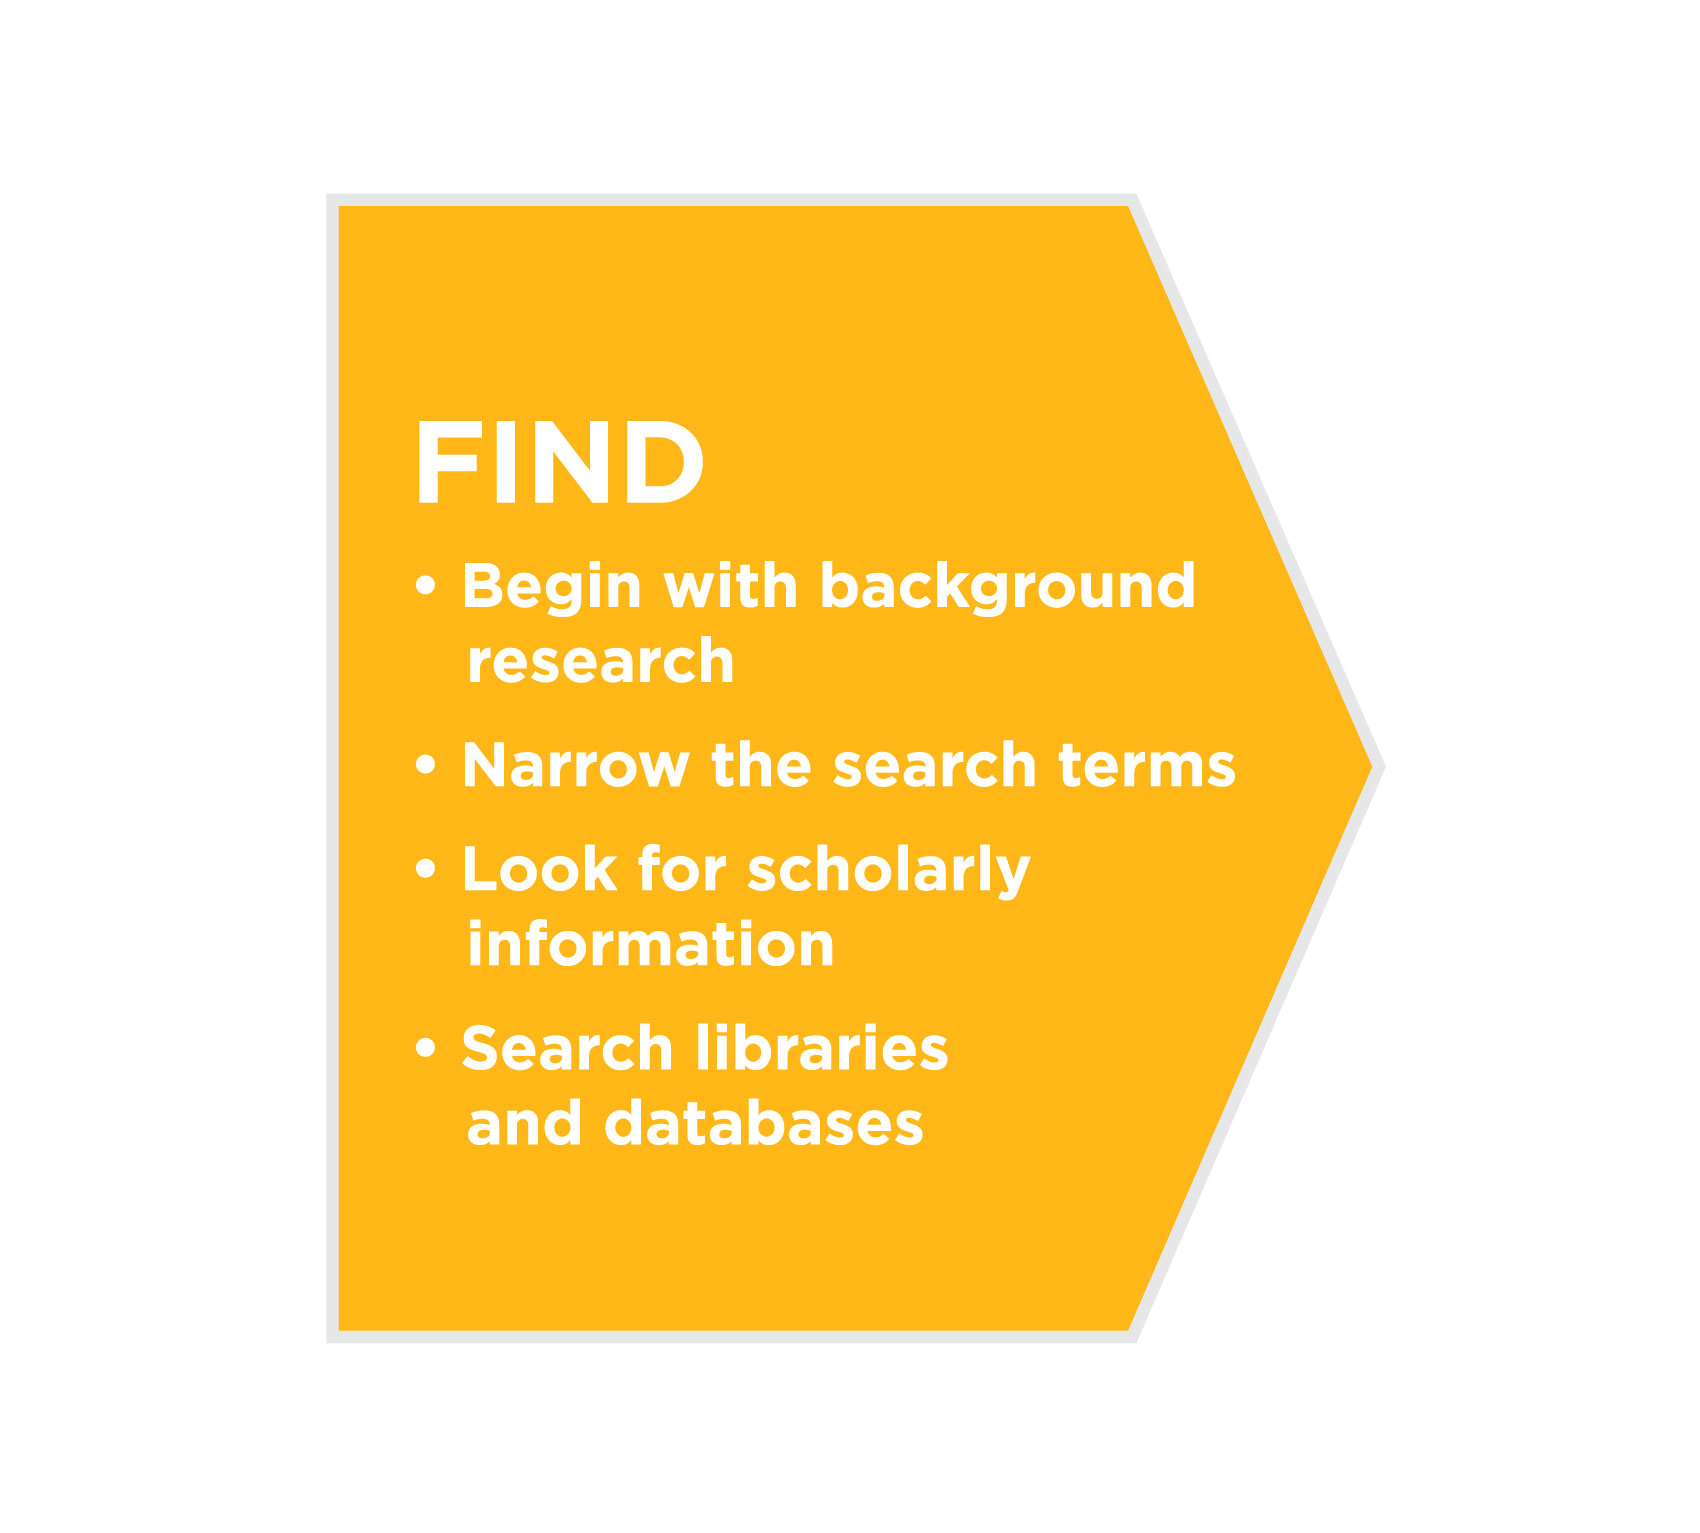 Tips for finding sources: begin with background research, narrow the search terms, look for scholarly information, and search libraries and databases.